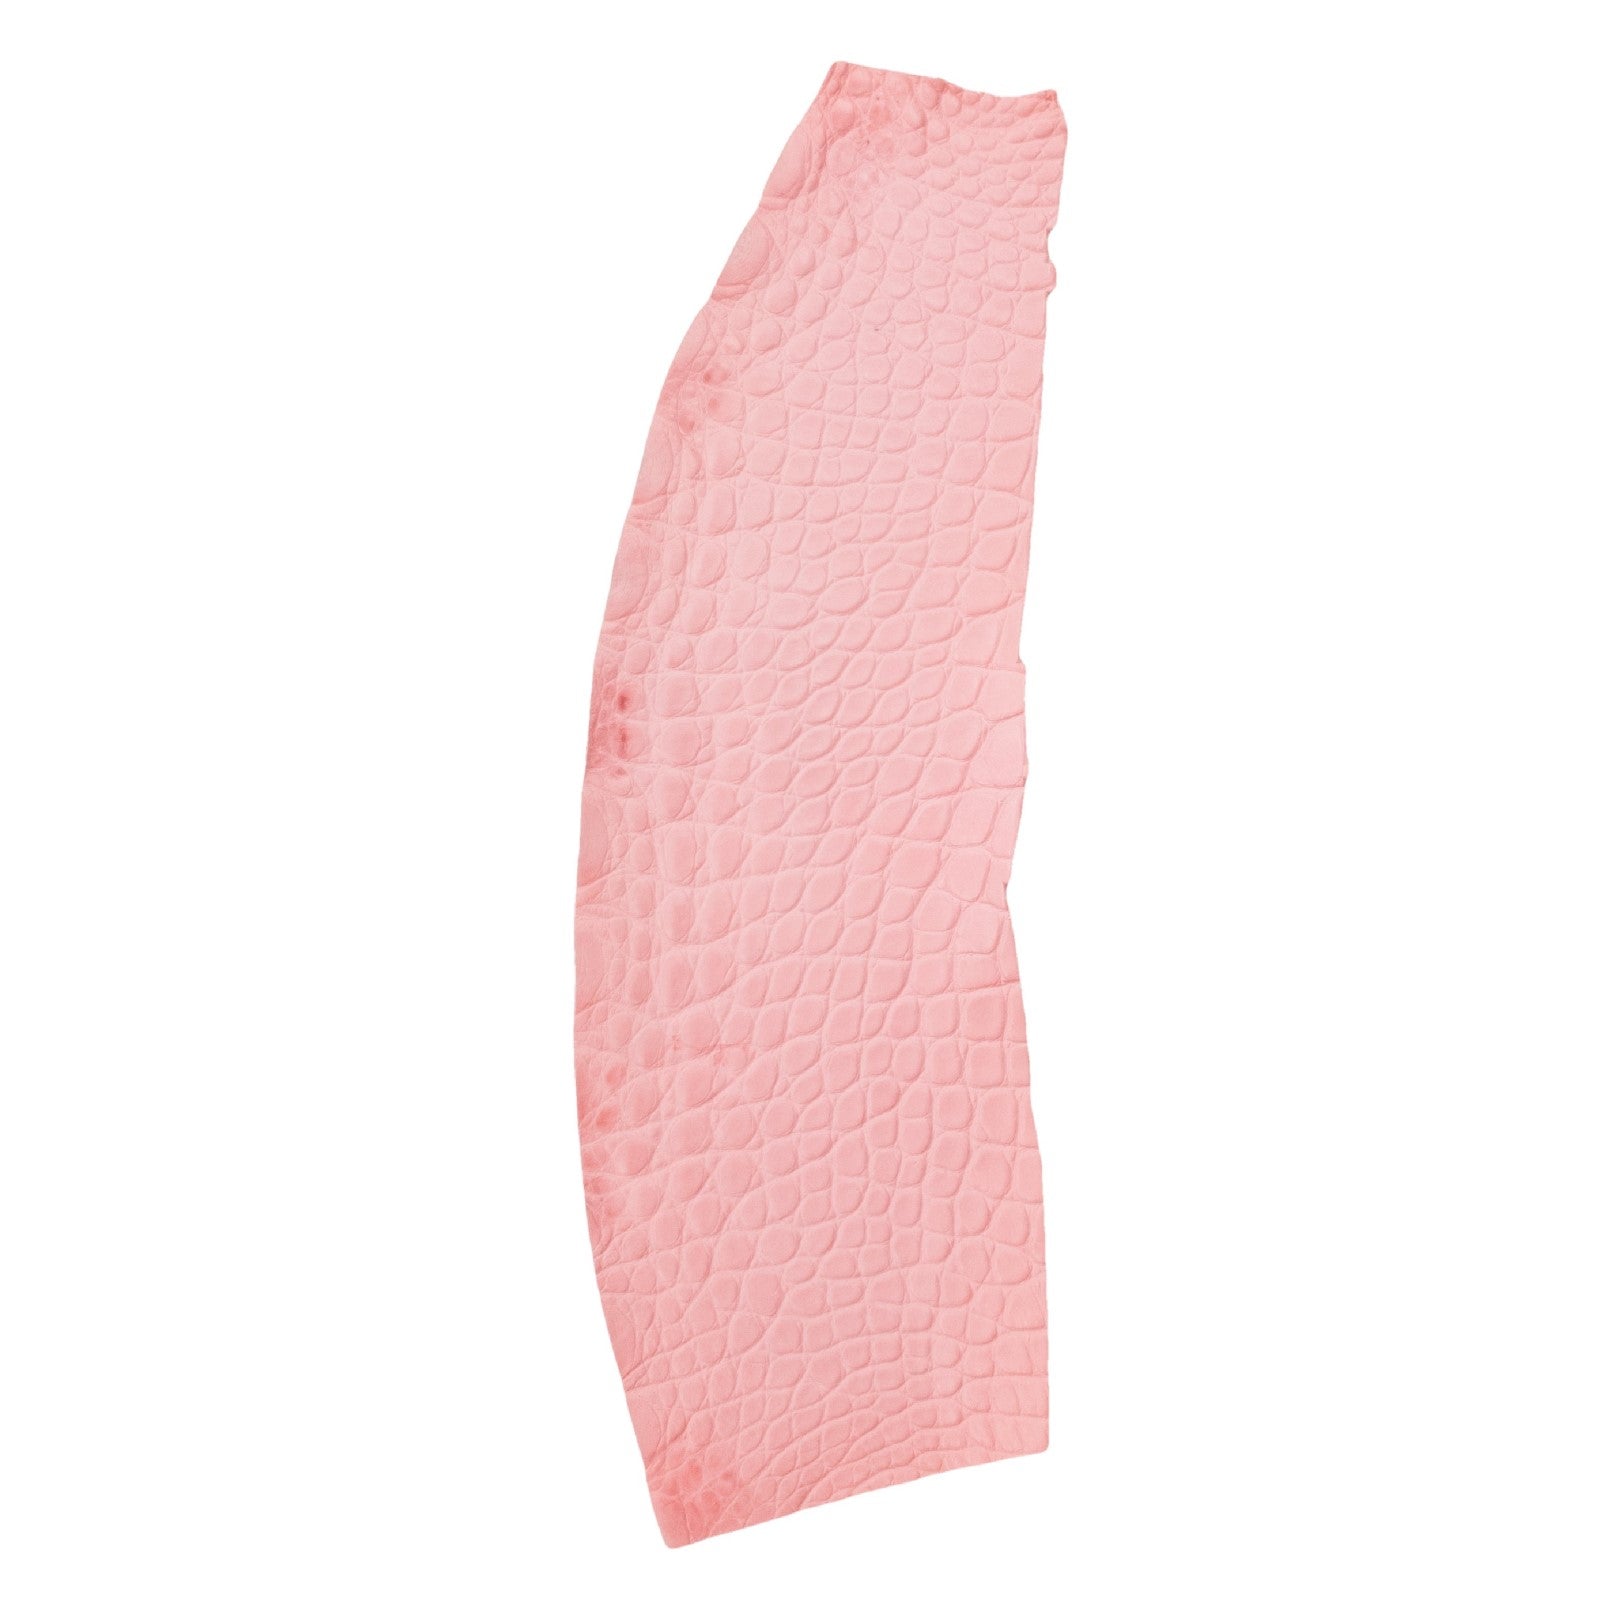 Alligator Skin Flank Various Colors Genuine Hide, Rosy Pink | The Leather Guy